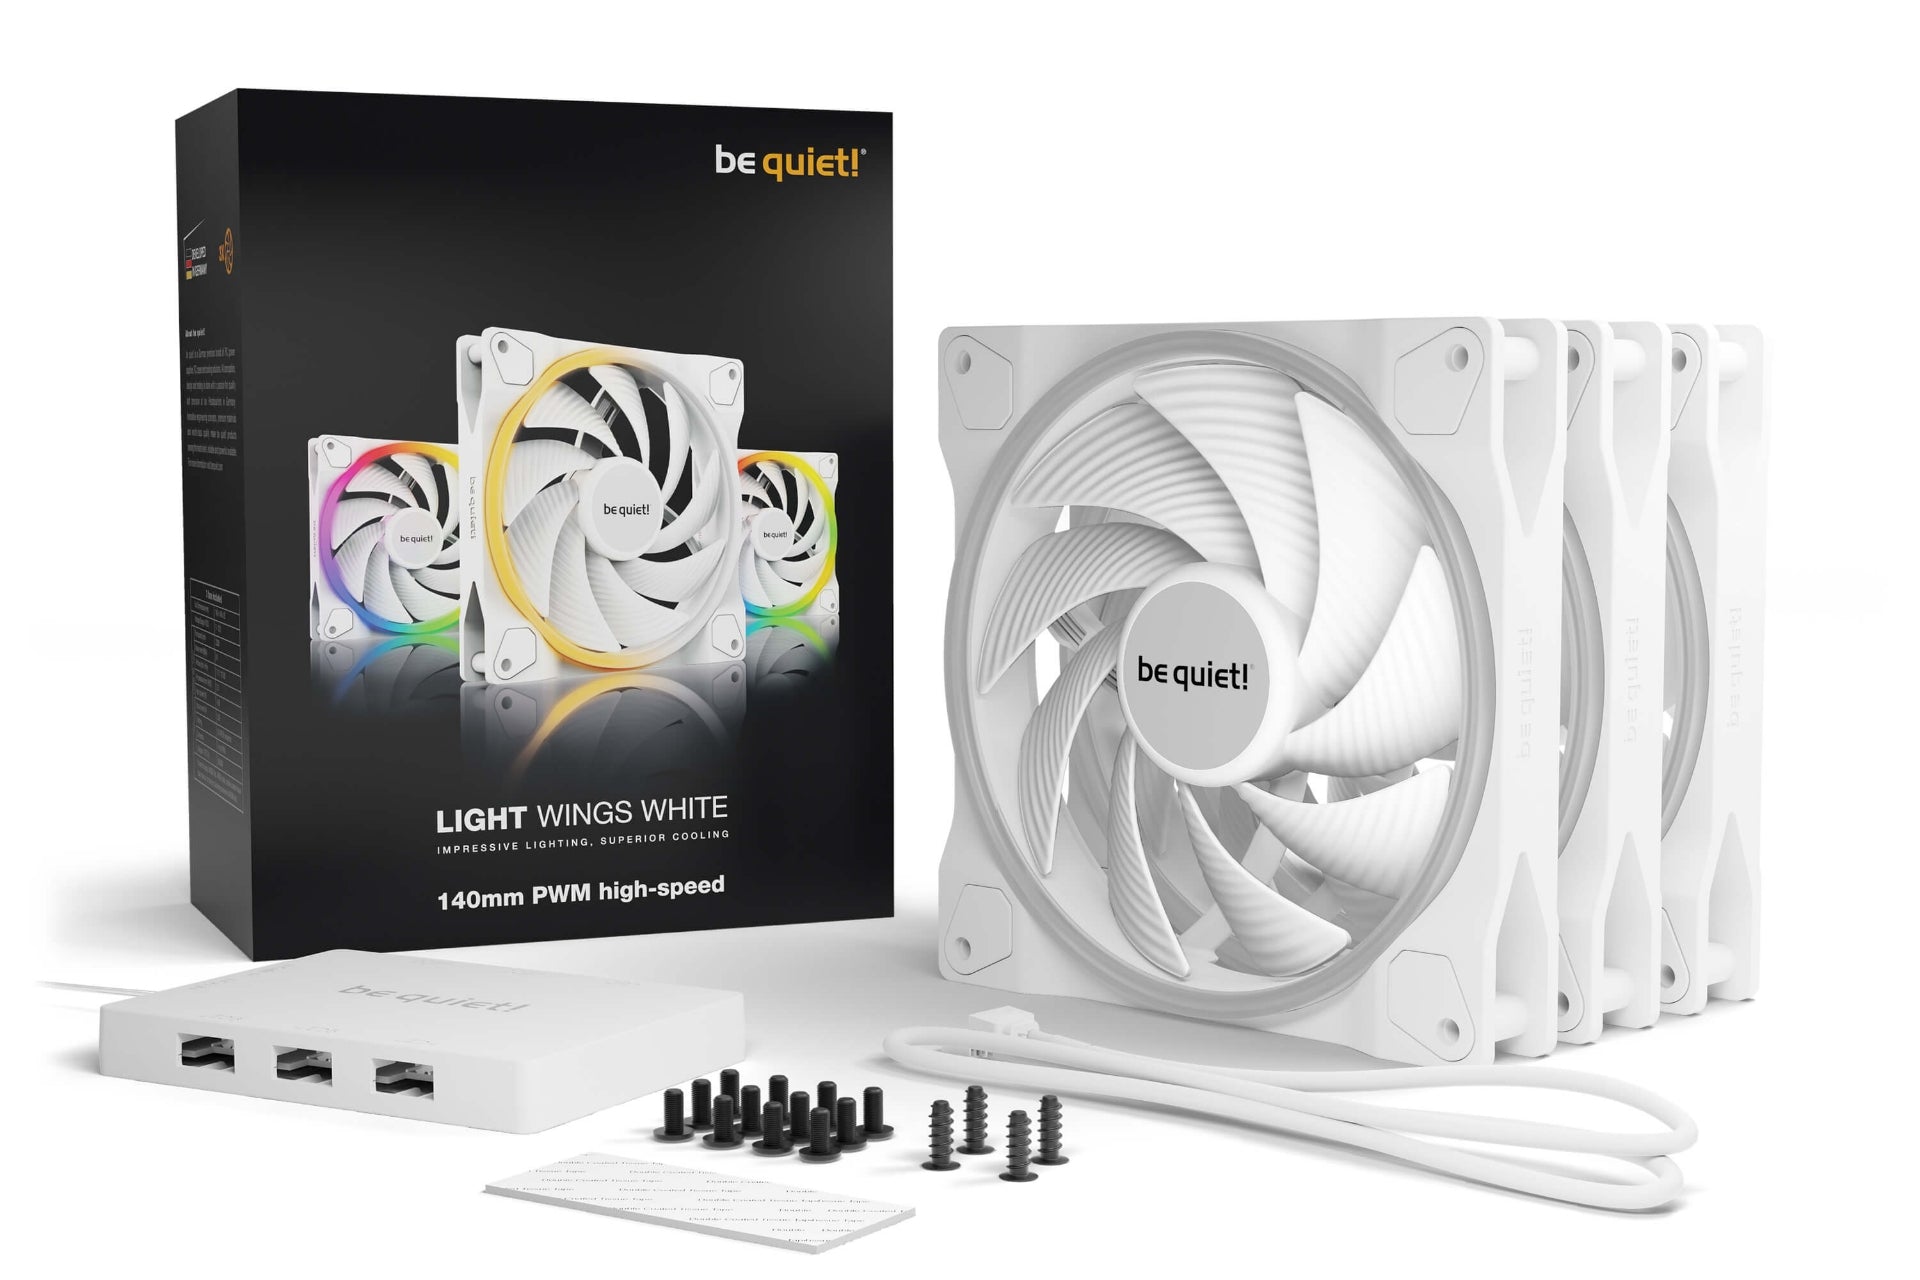 BE QUIET! LIGHT WINGS WHITE 140MM PWM HIGH-SPEED